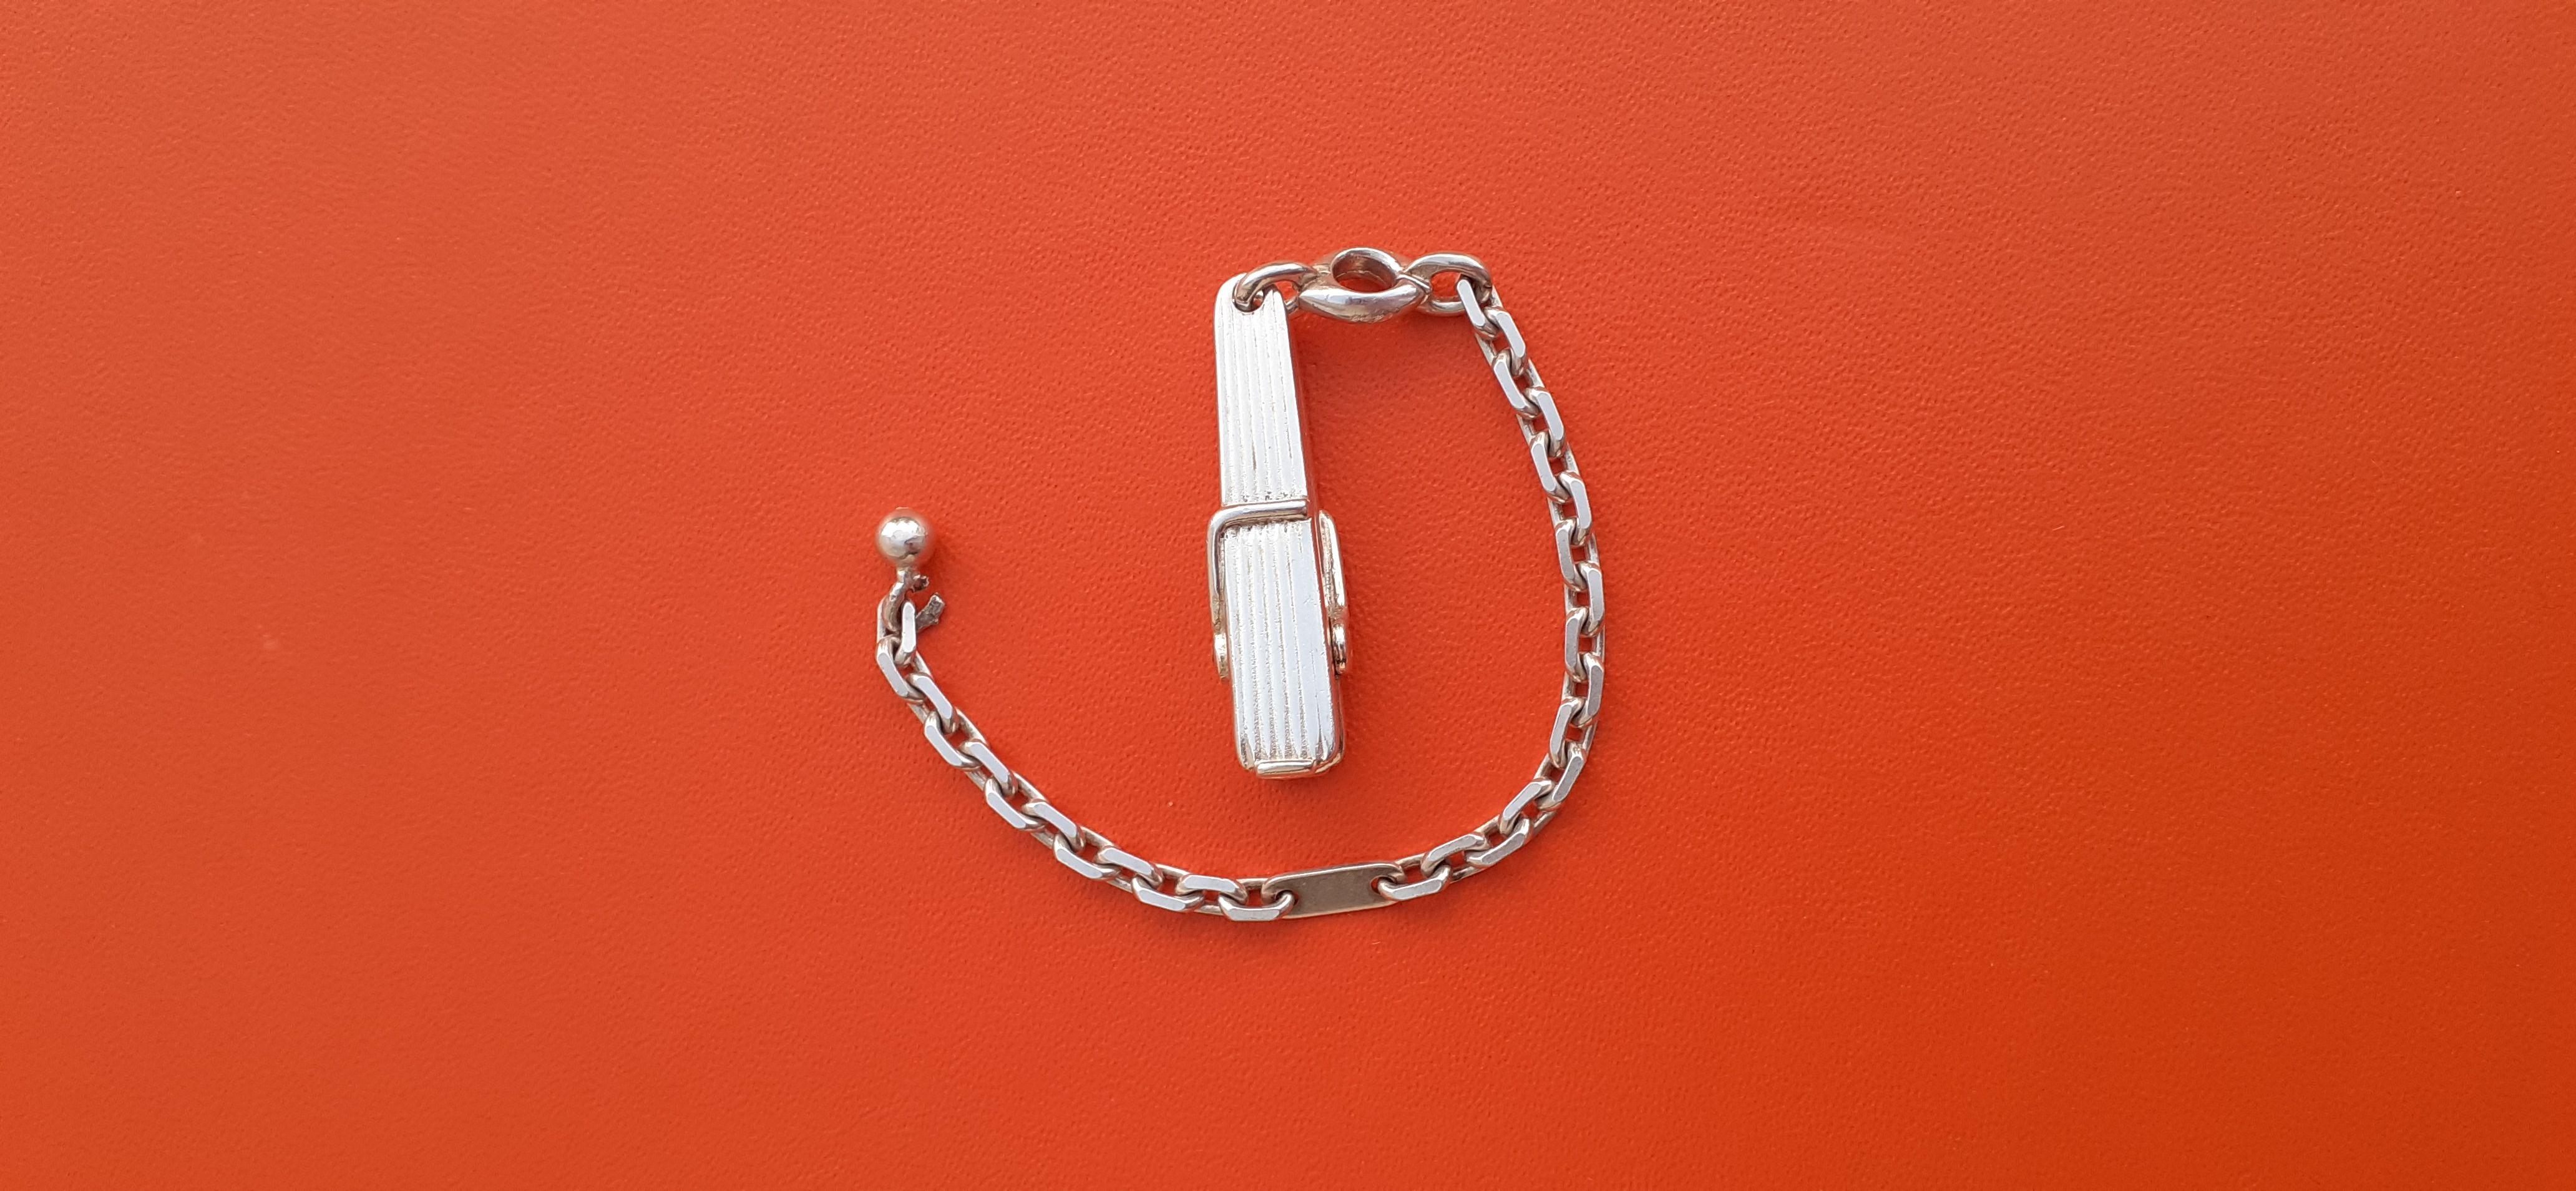 Hermès Money Clip Keychain Clothespin in Silver RARE For Sale 4